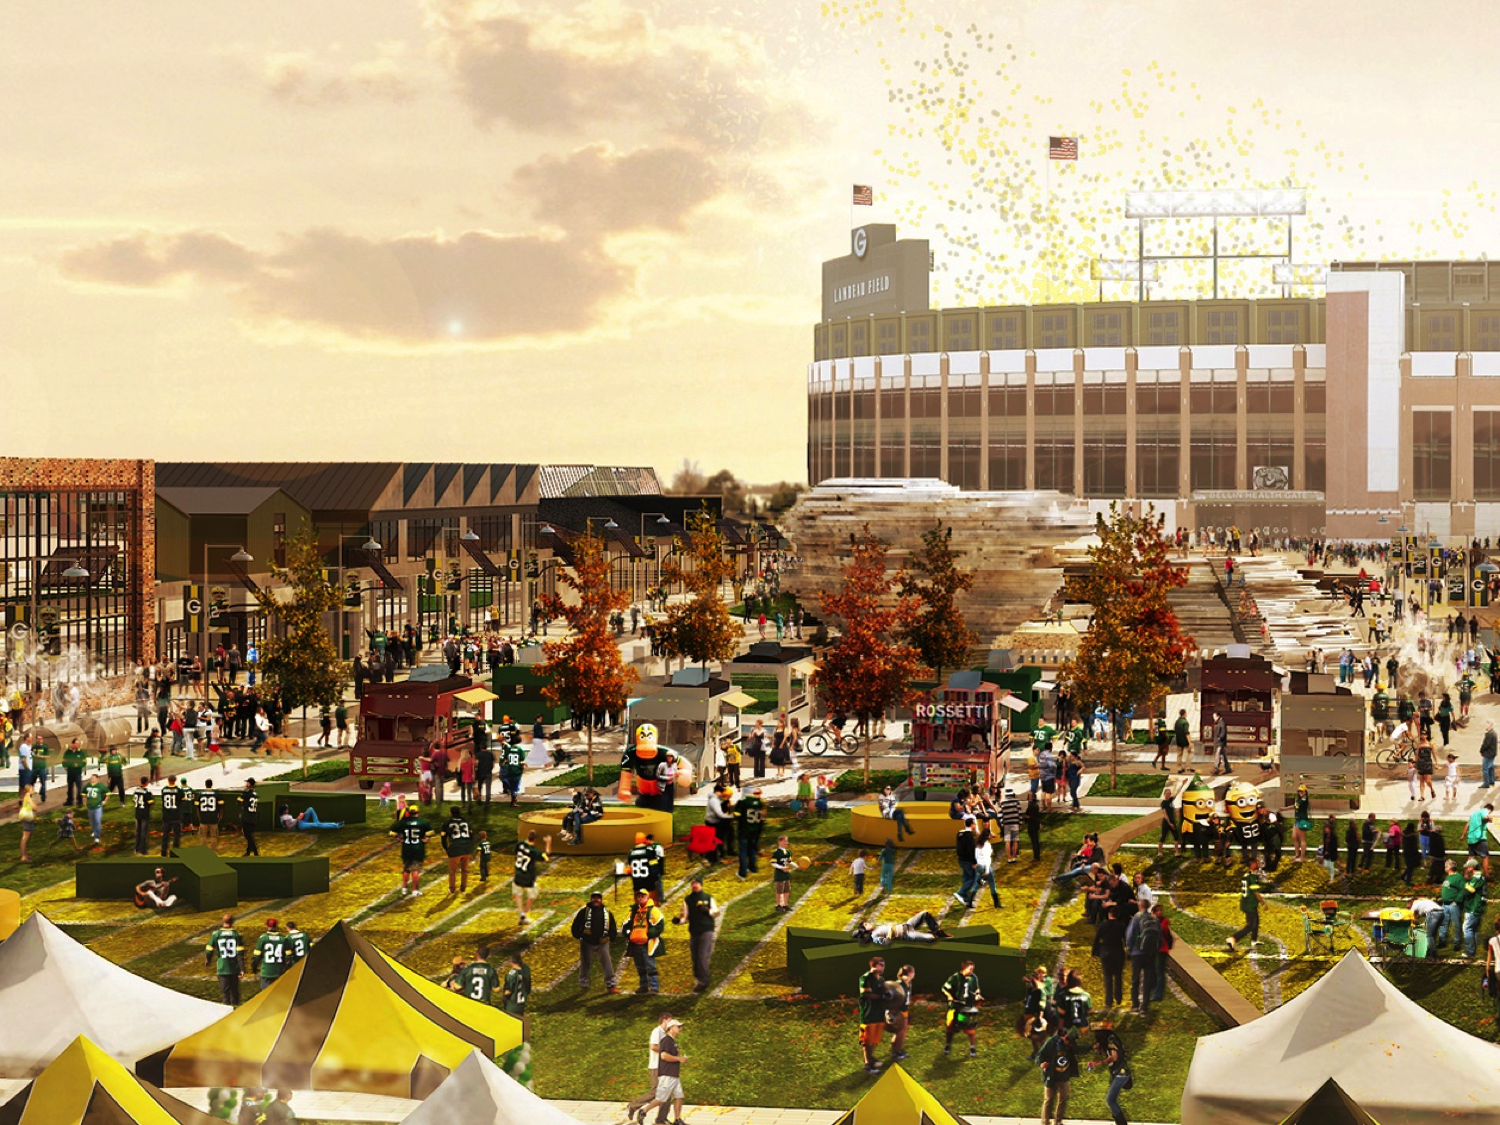 Artist rendering of Titletown District in Green Bay, WI. Image via Rossetti.